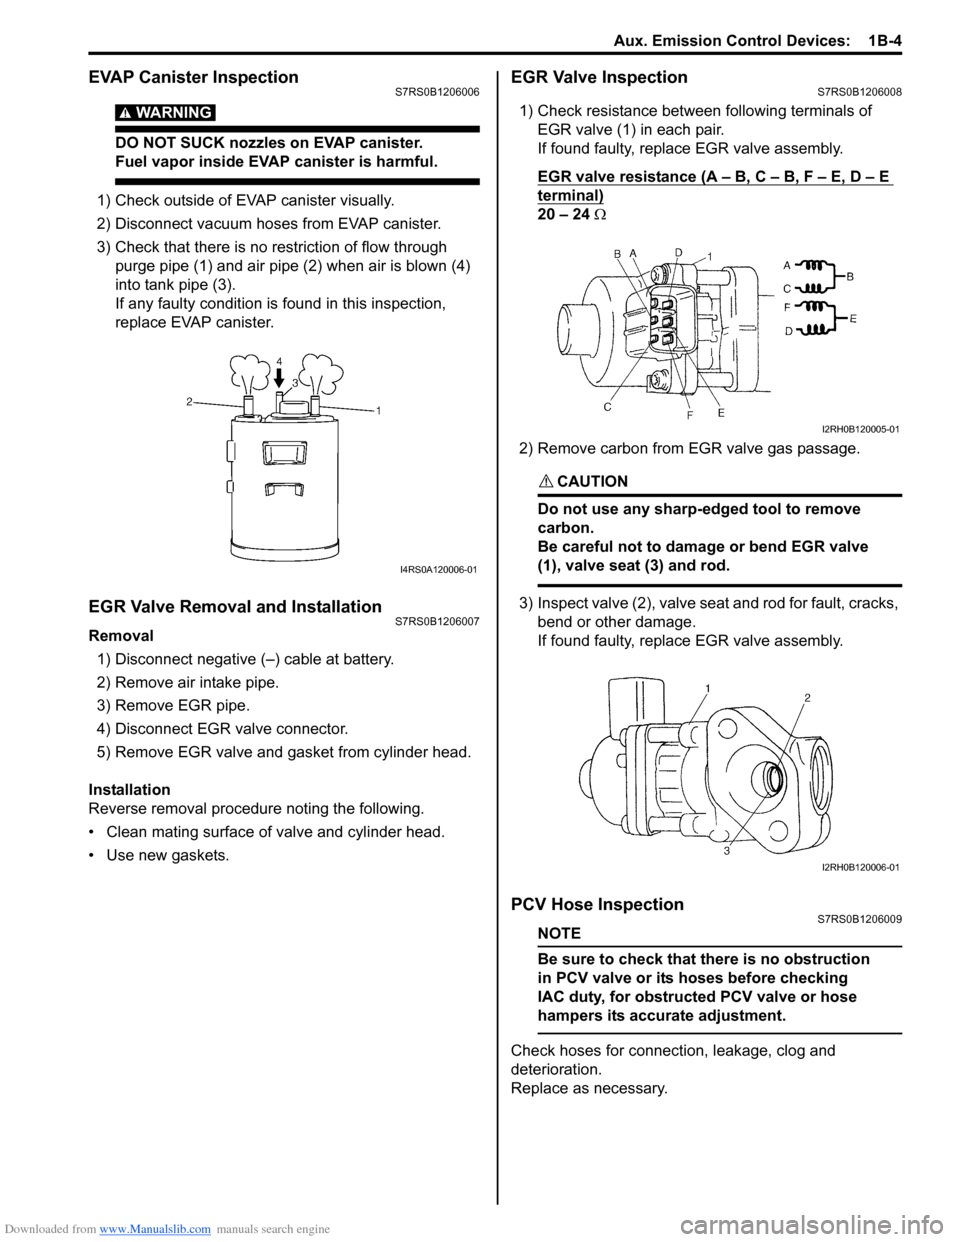 SUZUKI SWIFT 2006 2.G Service Workshop Manual Downloaded from www.Manualslib.com manuals search engine Aux. Emission Control Devices:  1B-4
EVAP Canister InspectionS7RS0B1206006
WARNING! 
DO NOT SUCK nozzles on EVAP canister. 
Fuel vapor inside E